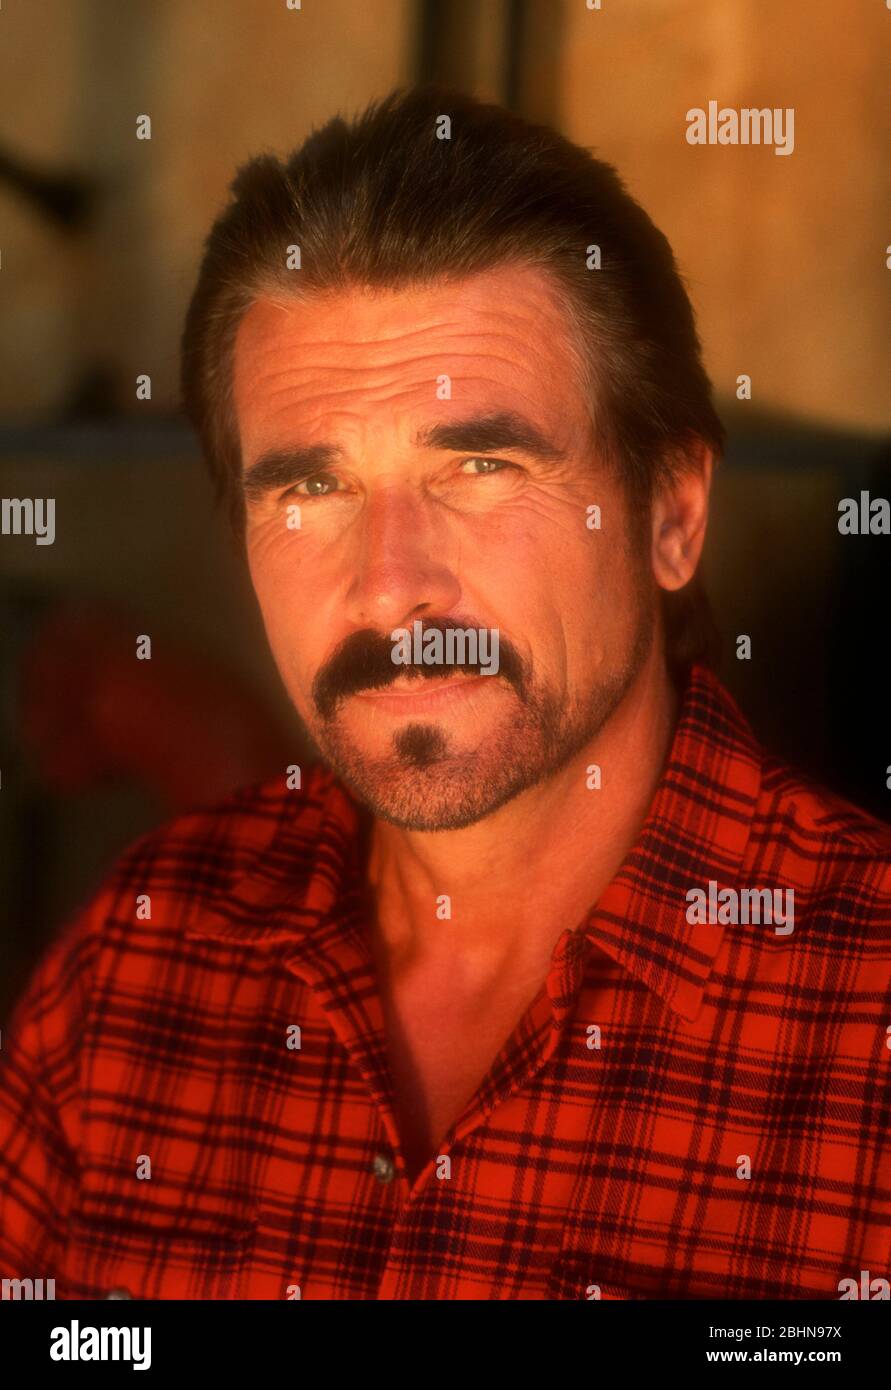 Los Angeles, California, USA 12th September 1995 (Exclusive) Actor James Brolin poses at an exclusive photo shoot on September 12, 1995 in Los Angeles, California, USA. Photo by Barry King/Alamy Stock Photo Stock Photo